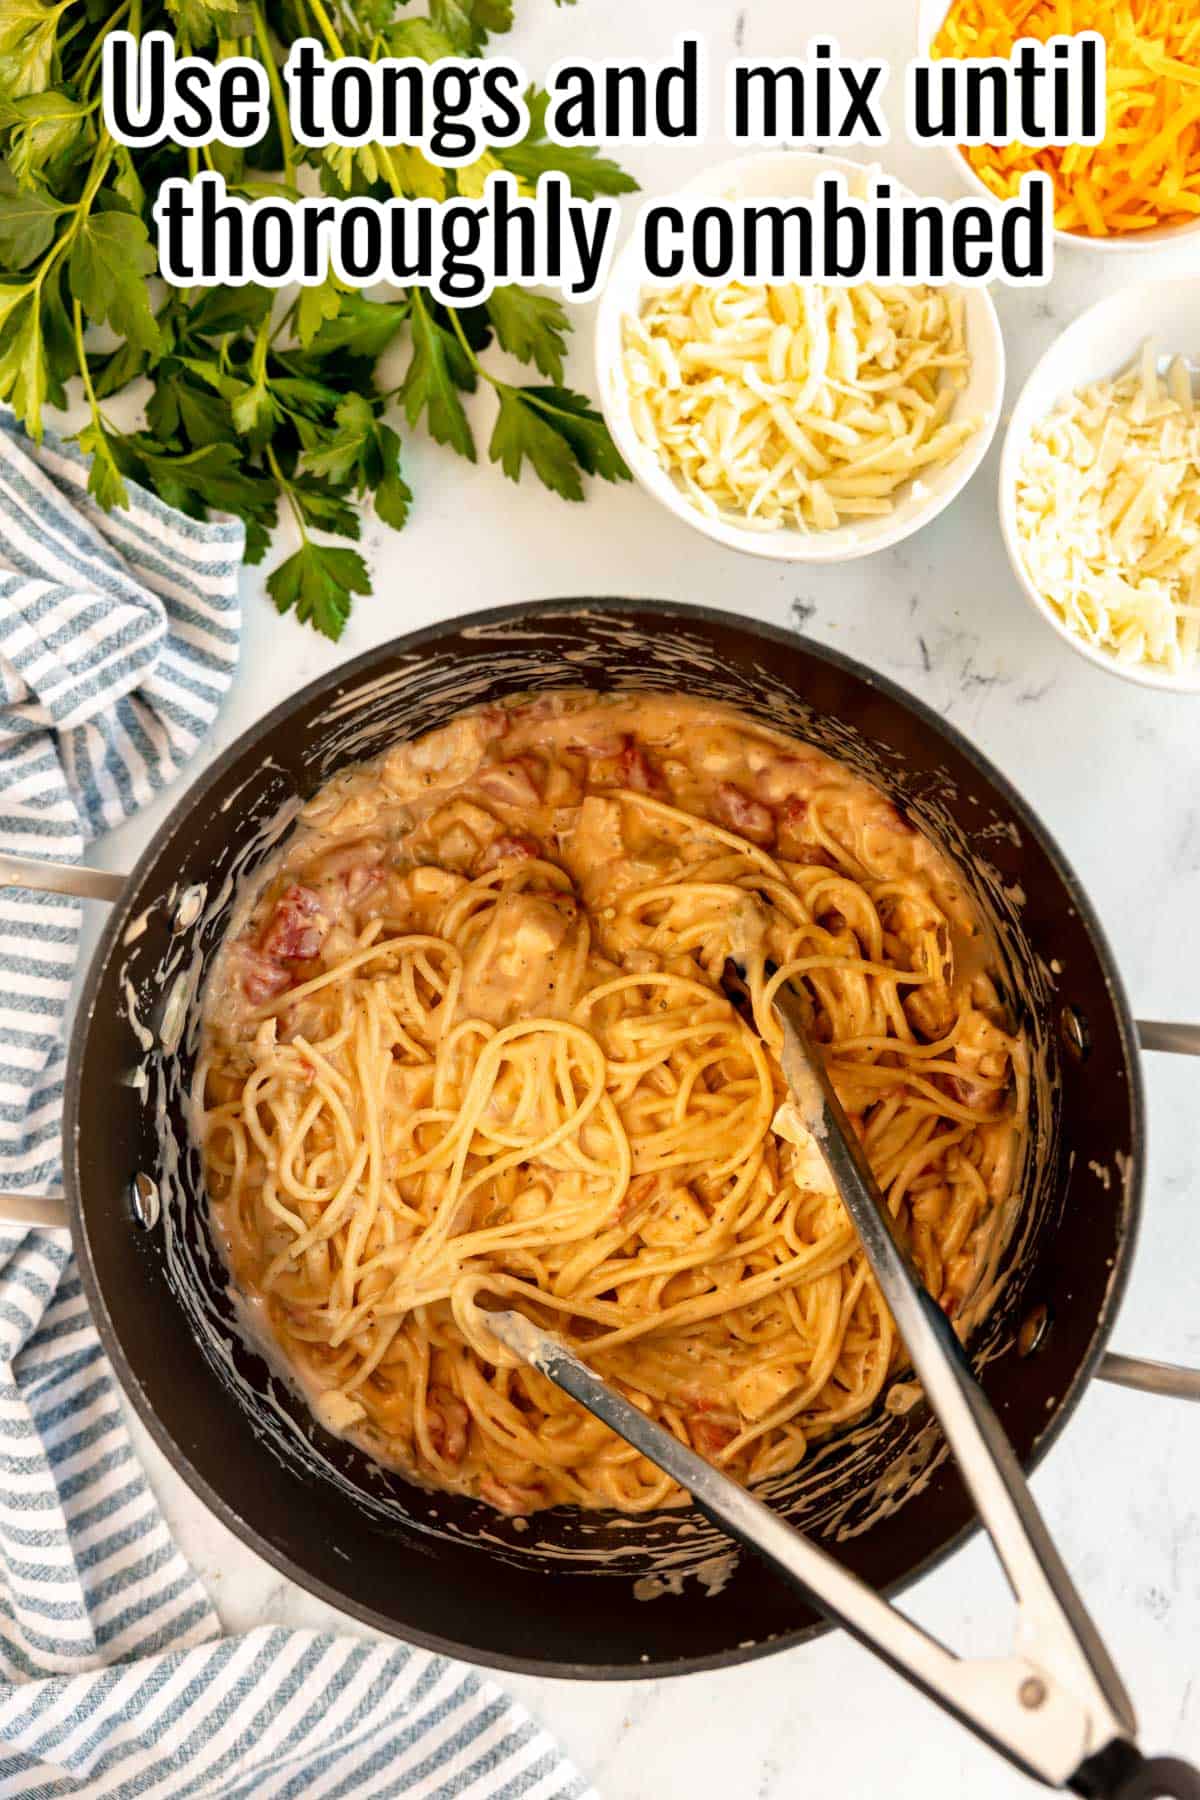 Use tongs to thoroughly combine creamy spaghetti and chicken.